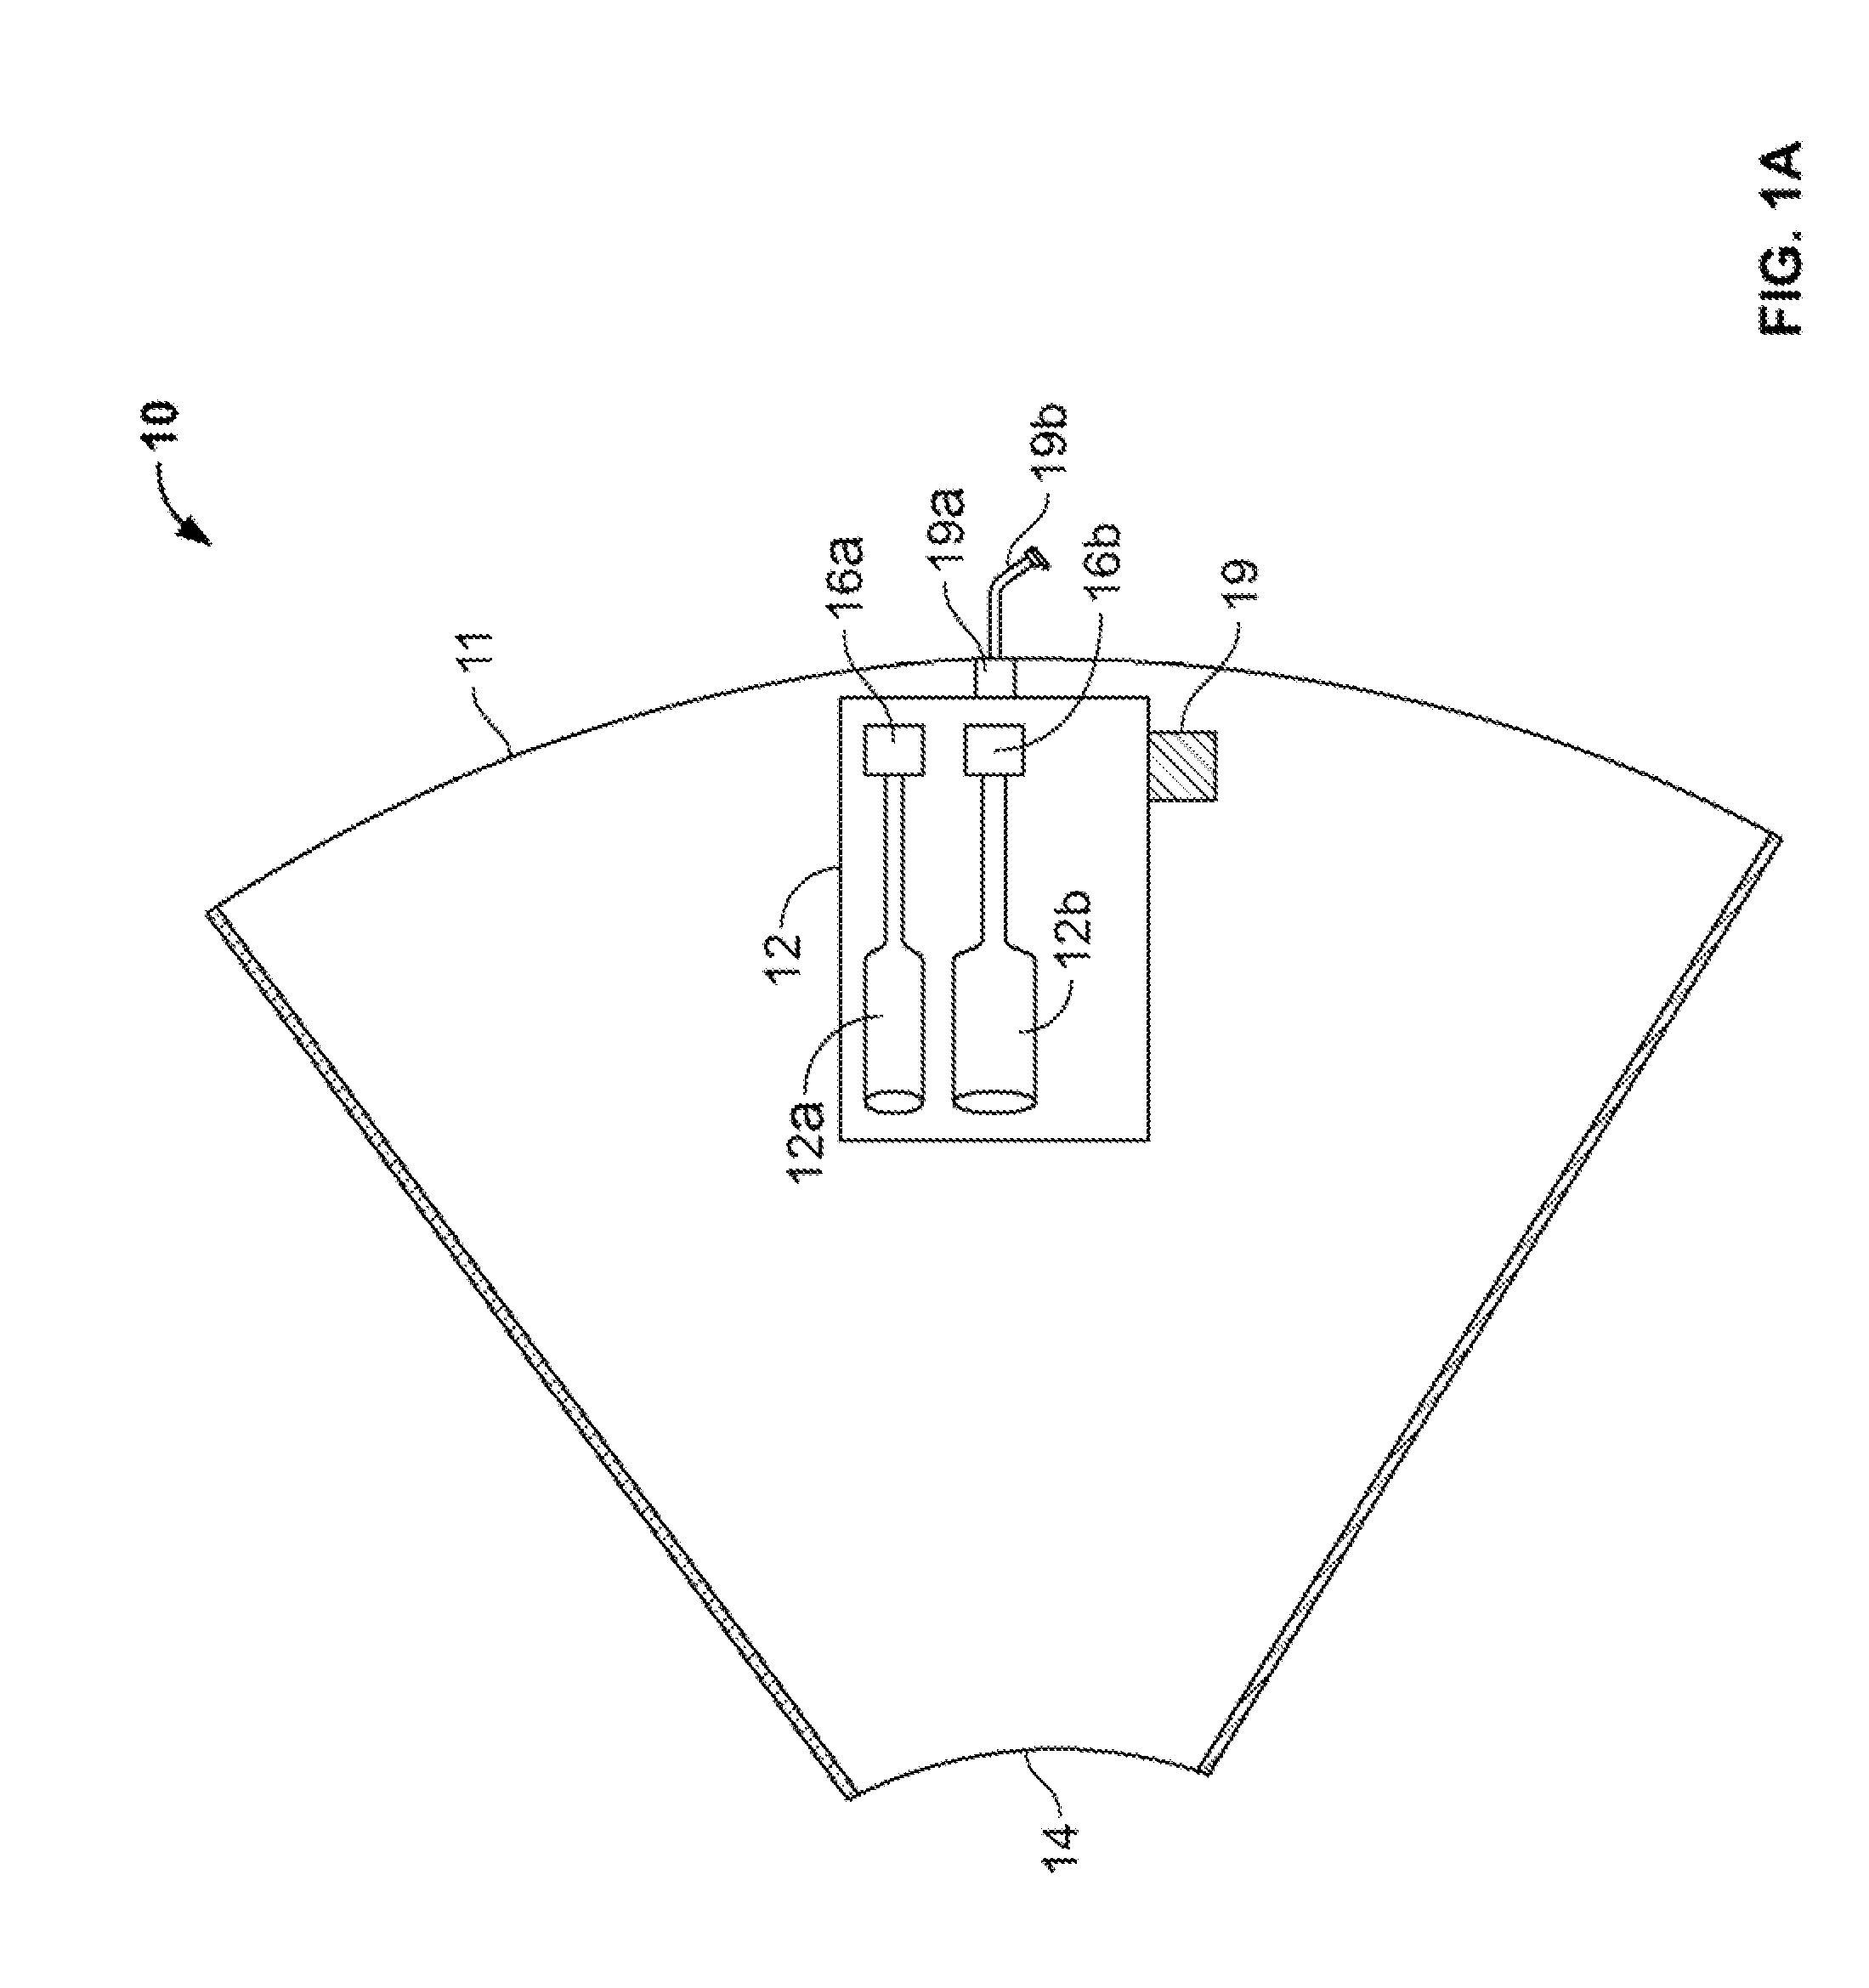 Multi-Band antenna System for Satellite Communications